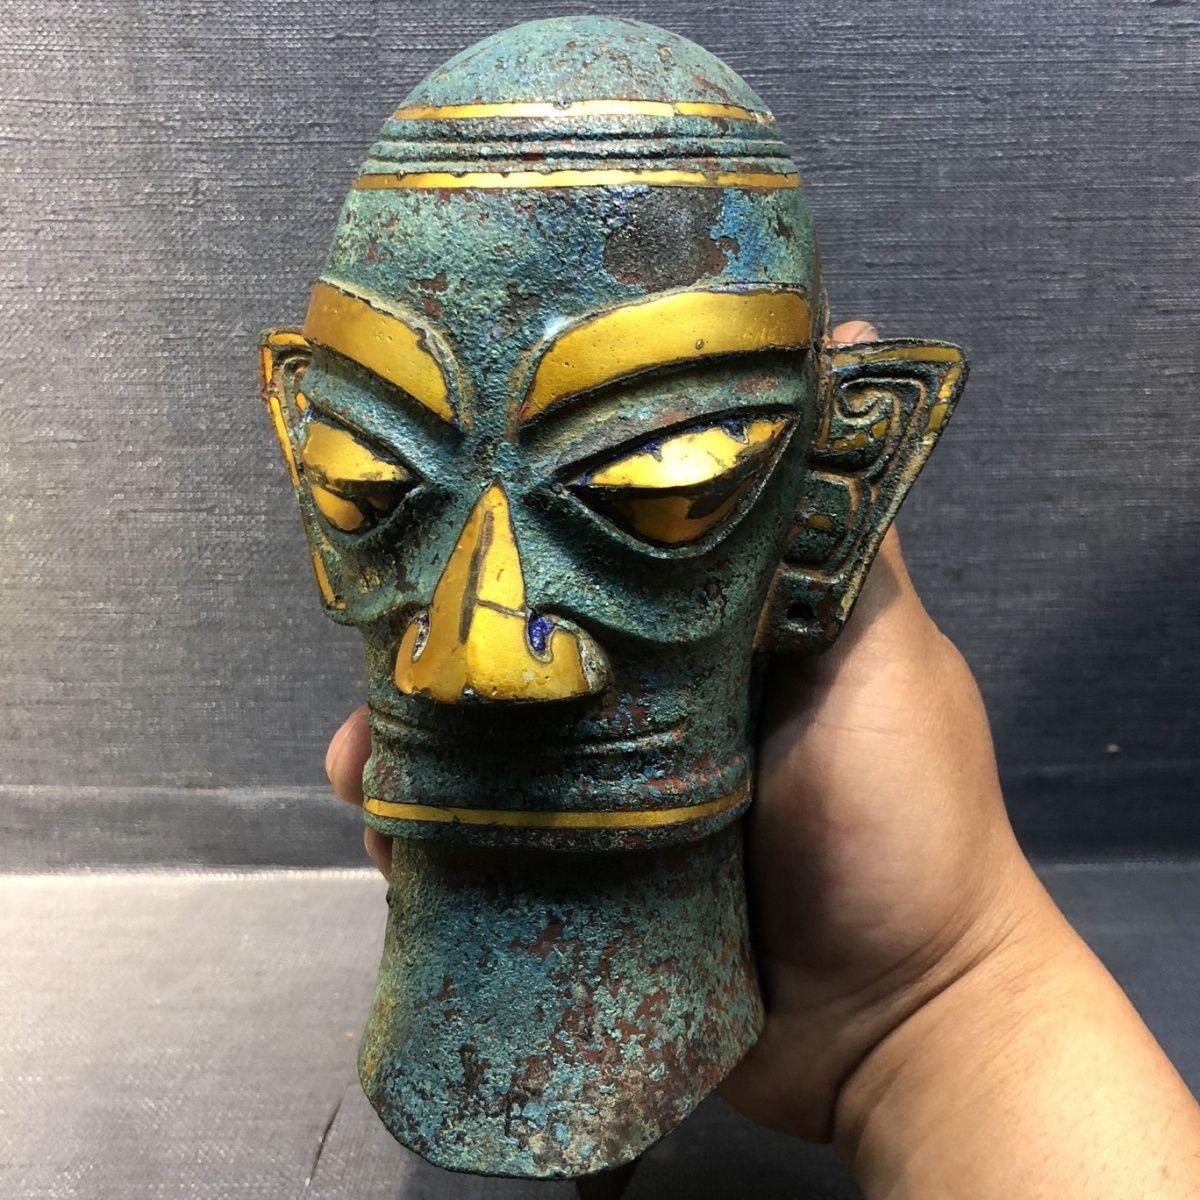 Sanxingdui is an ancient cultural site that dates back to the Bronze Age, the Sanxingdui Head is a gilt bronze statue head that is believed to have once been part of a full-bodied figure. It is one of the most striking and enigmatic pieces found at